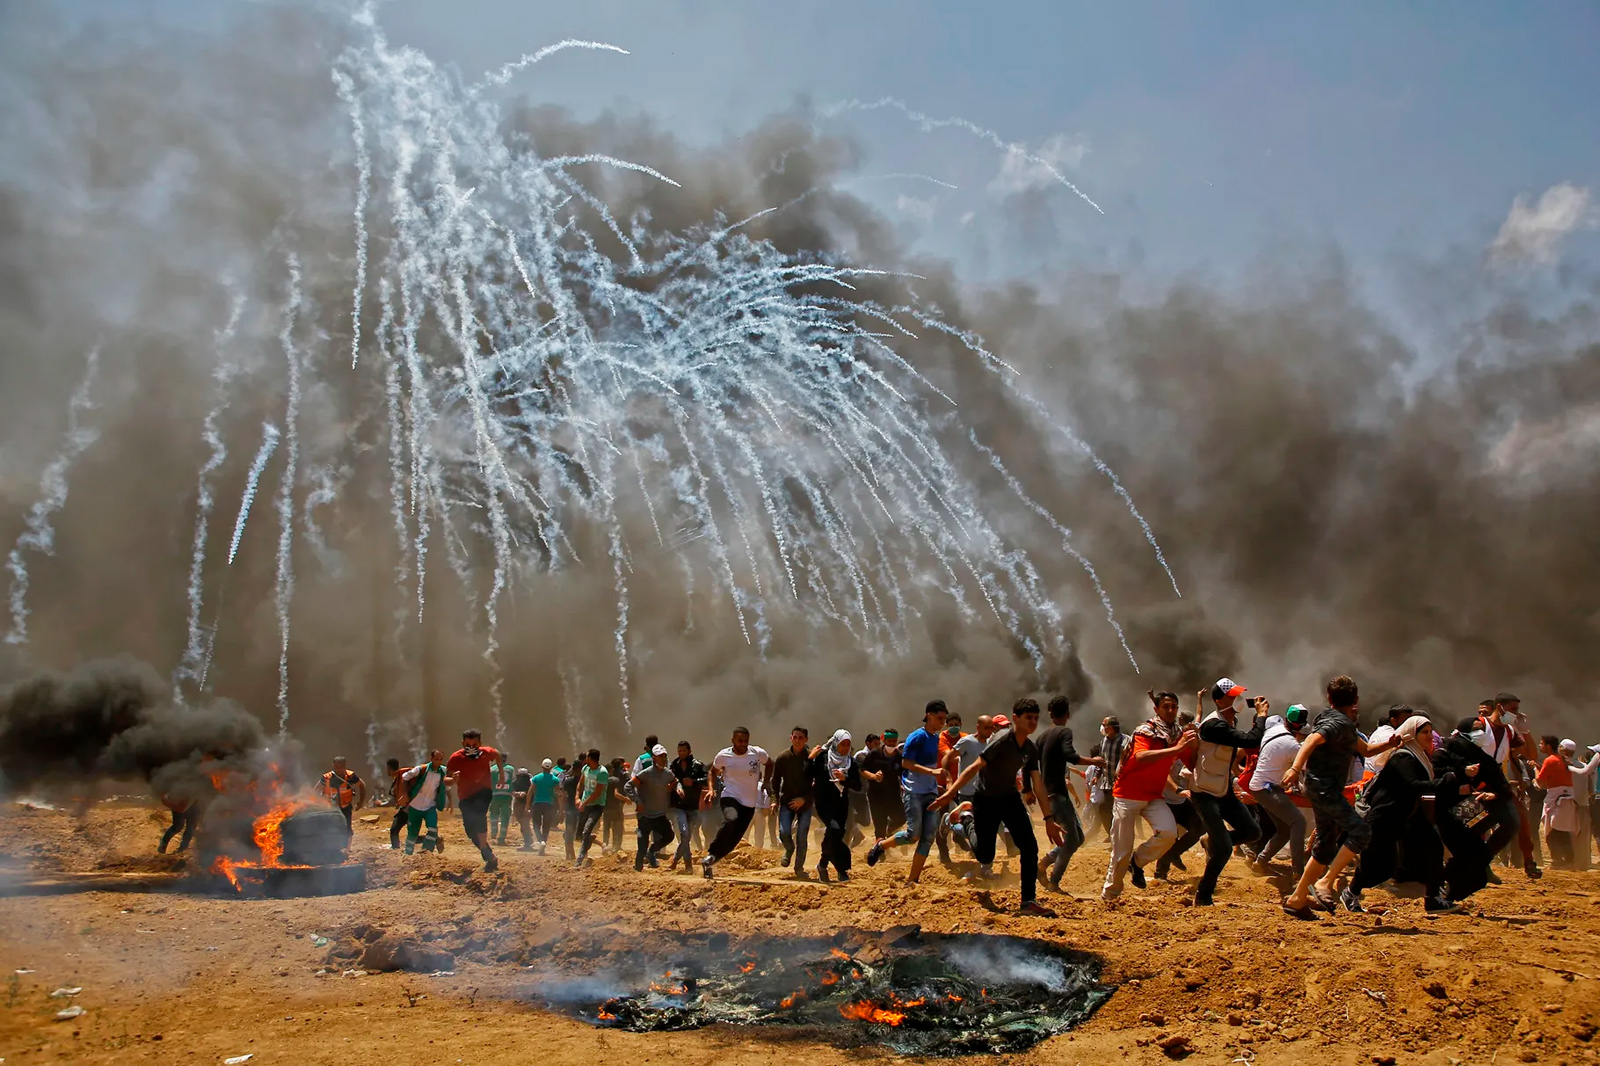 Israeli soldiers firing tear gas at Palestinians, Gaza City, 14 May 2018. The protest was part of the months-long Great March of Return demonstrations. In its “Report of the Independent International Commission of Inquiry on the Protests in the Occupied Palestinian Territory,” the UN Human Rights Council determined that between 30 March 2018 and the end of the year, Israeli soldiers killed 189 Palestinians demonstrators, including 35 children, 2 members of the press, and 3 health workers. In addition, some 9,000 Palestinians were injured, the vast majority as a result of live ammunition. Photo Mohammed Abed.